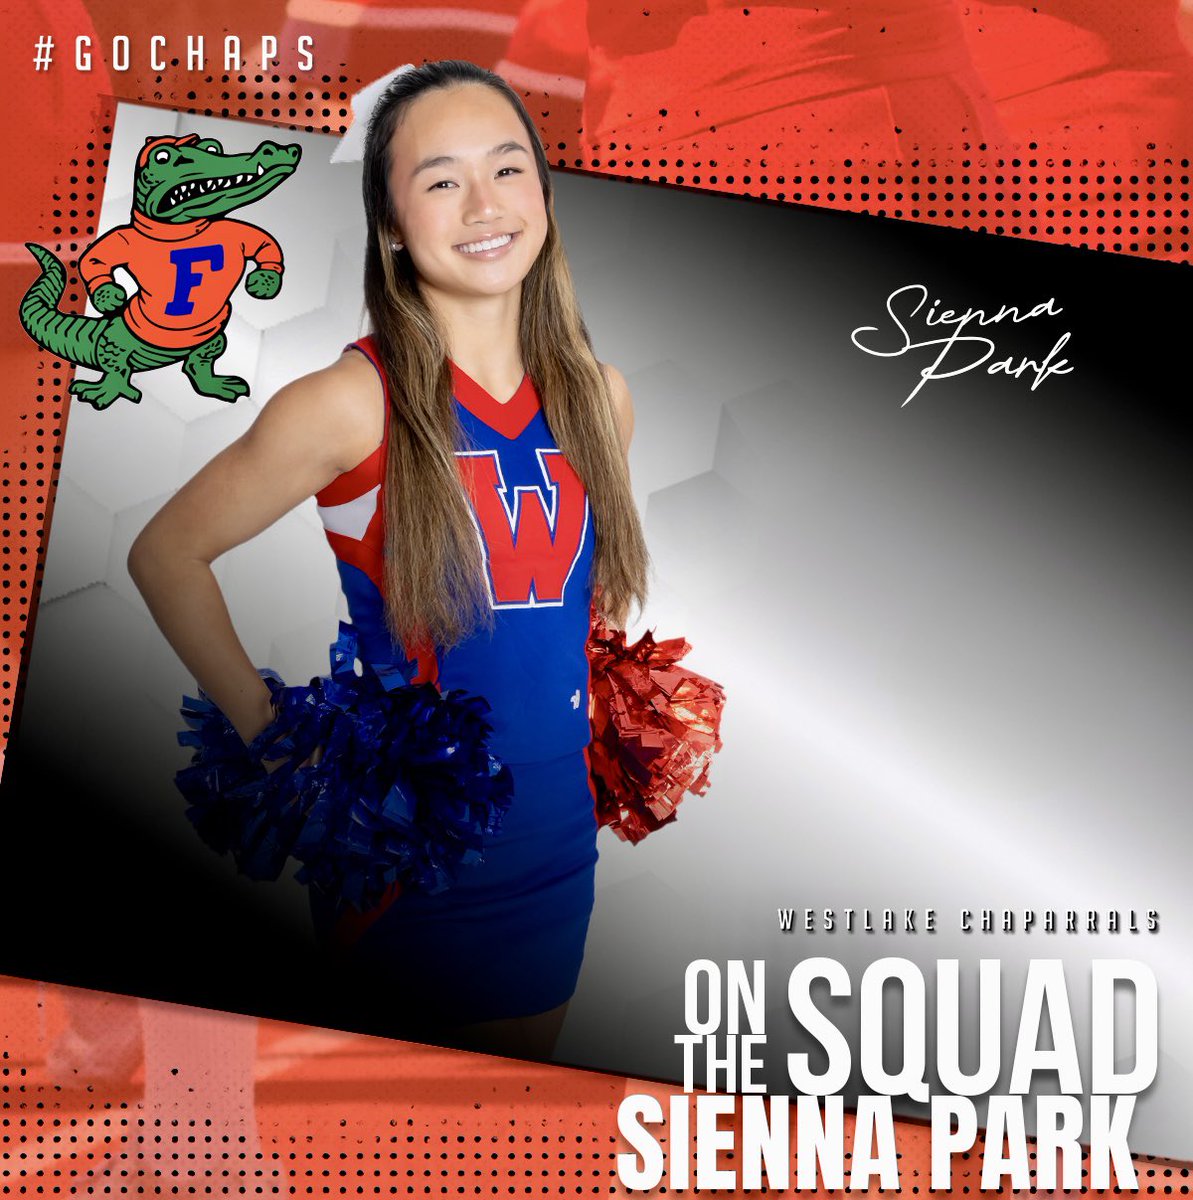 We’re fired up for Westlake Cheer’s Sienna Park as she will continue her academic and cheerleading career at the University of Florida. #GoChaps #GoGators